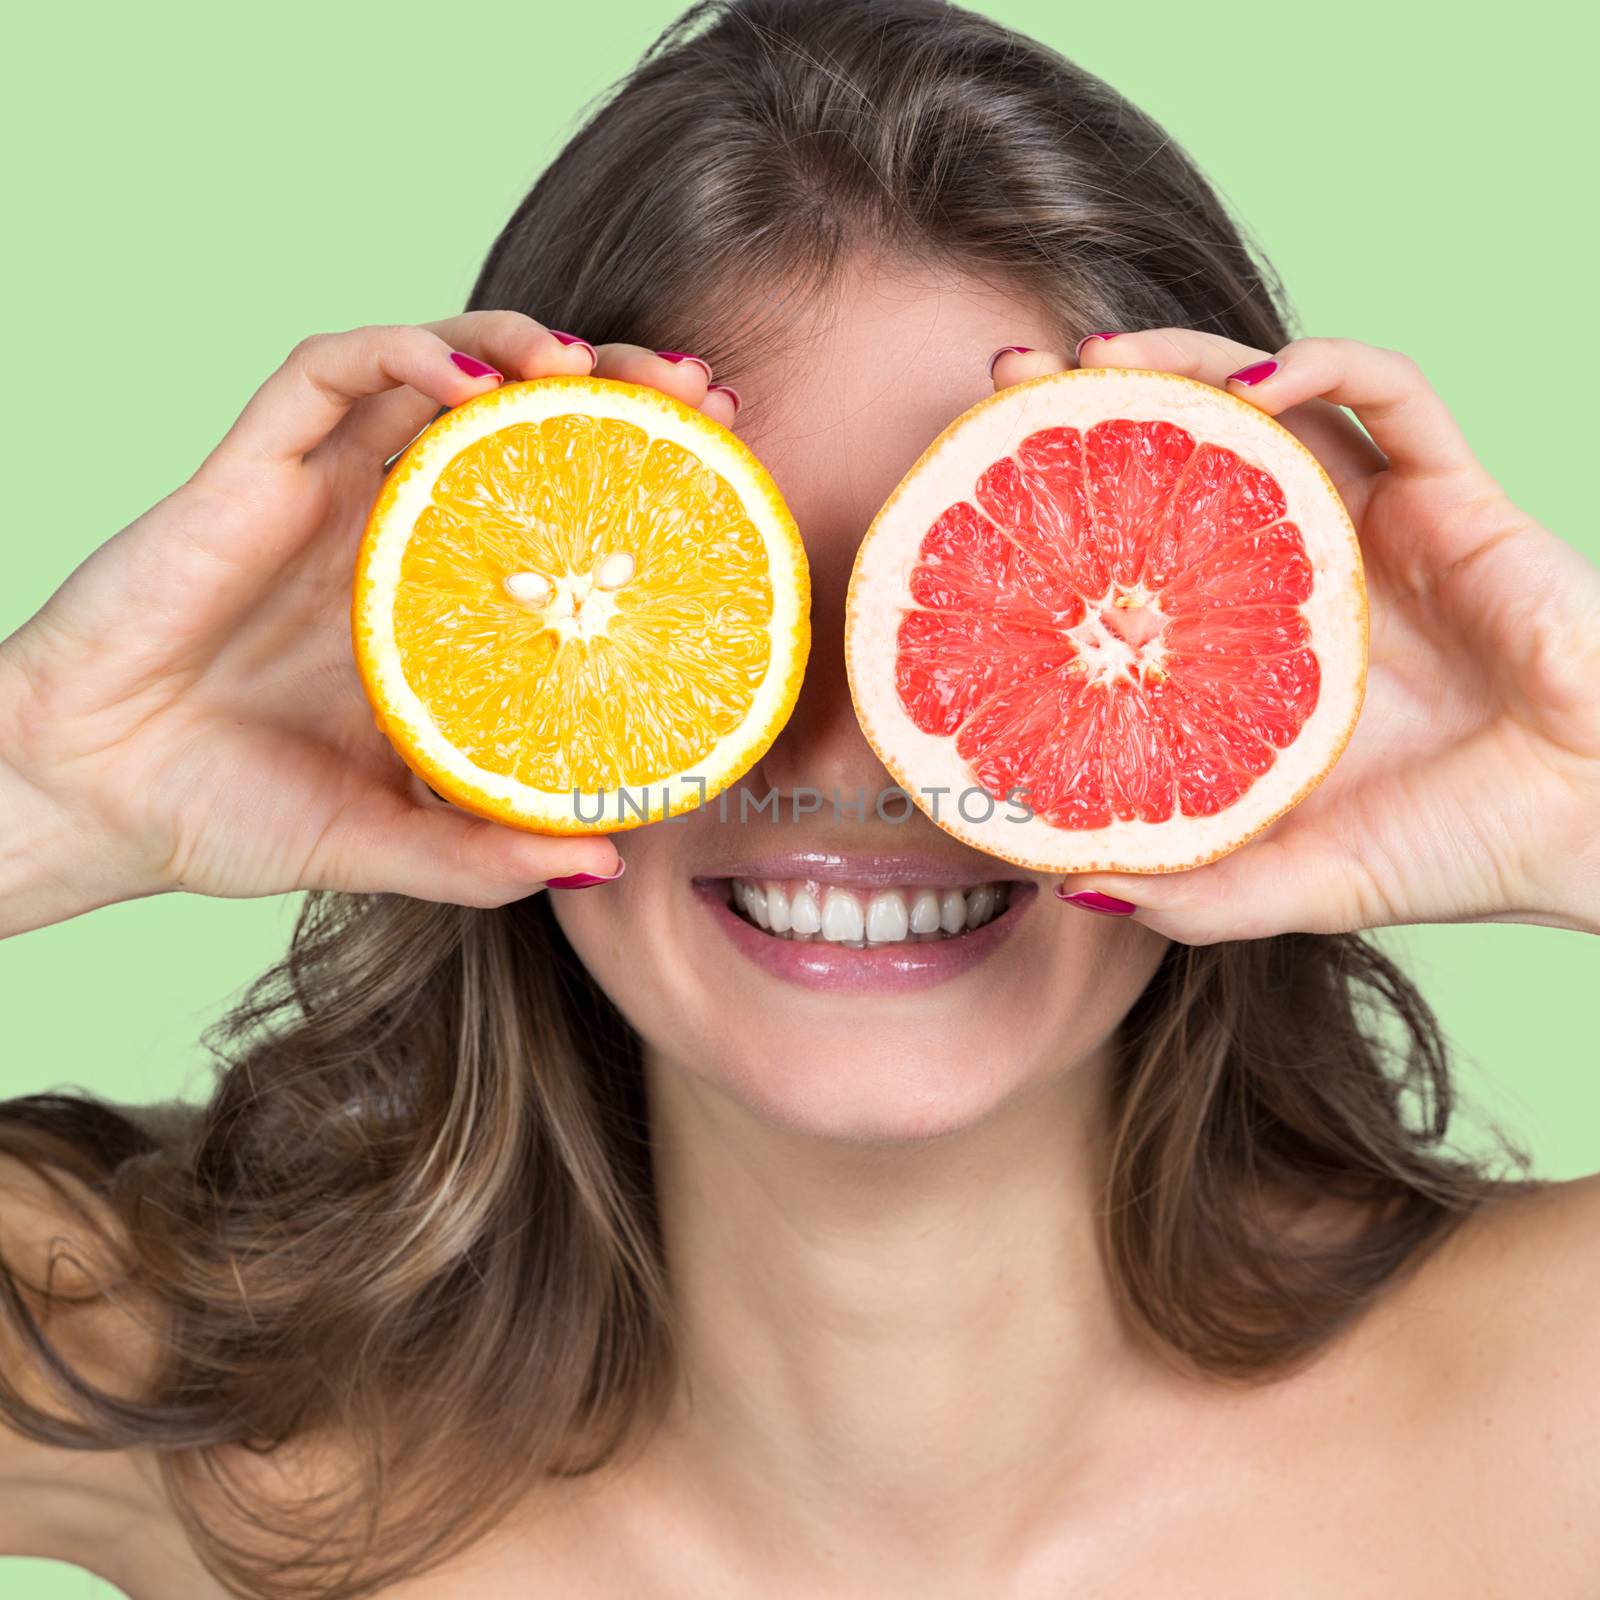 Smiling woman holding slices of orange and grapefruit in front of her eyes